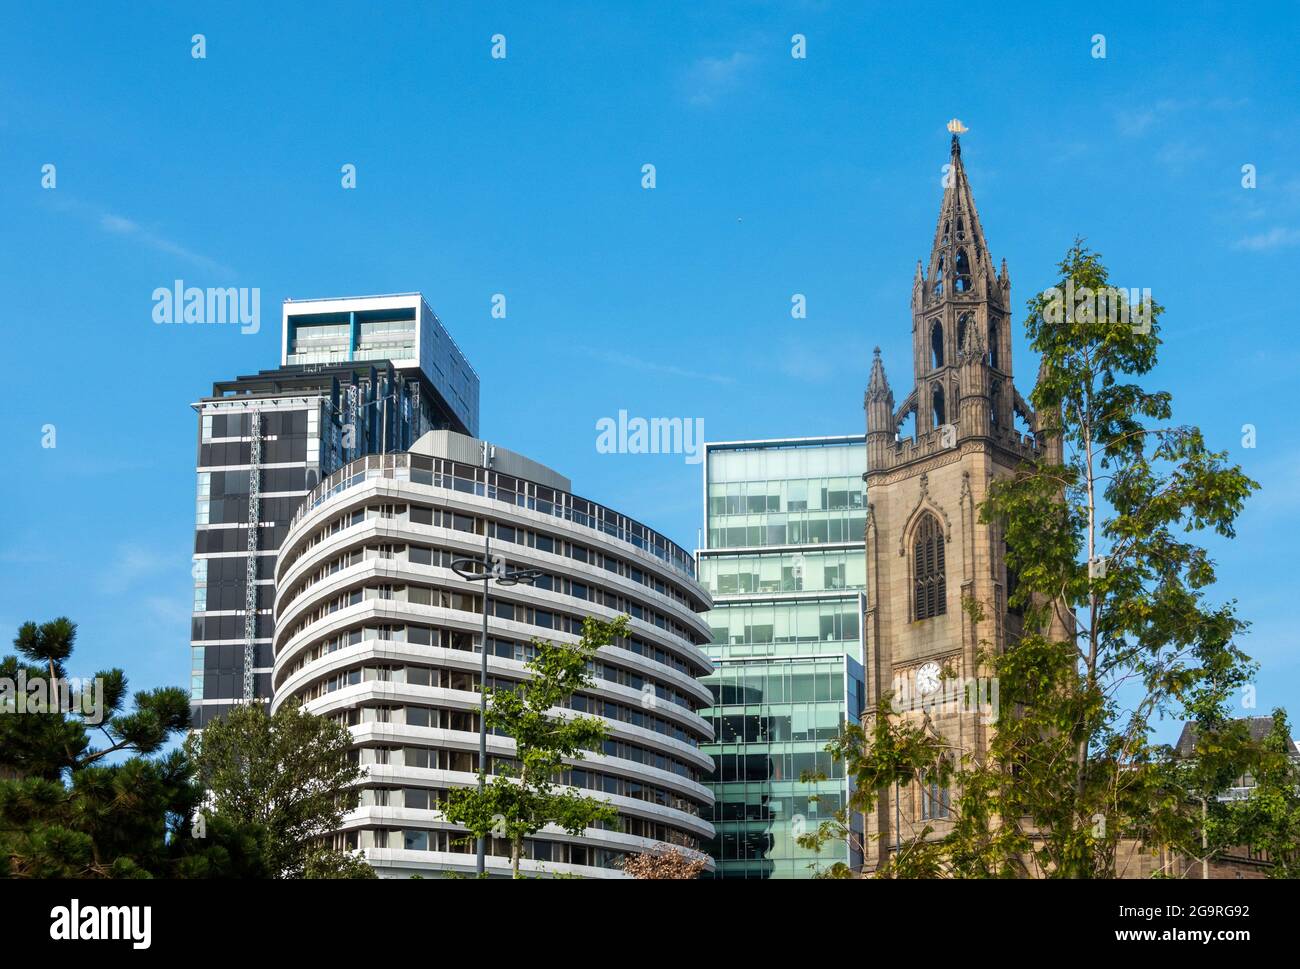 The Church of Our Lady and Saint Nicholas, the Anglican parish church of Liverpool standing next to a mix of modern buildings. Stock Photo